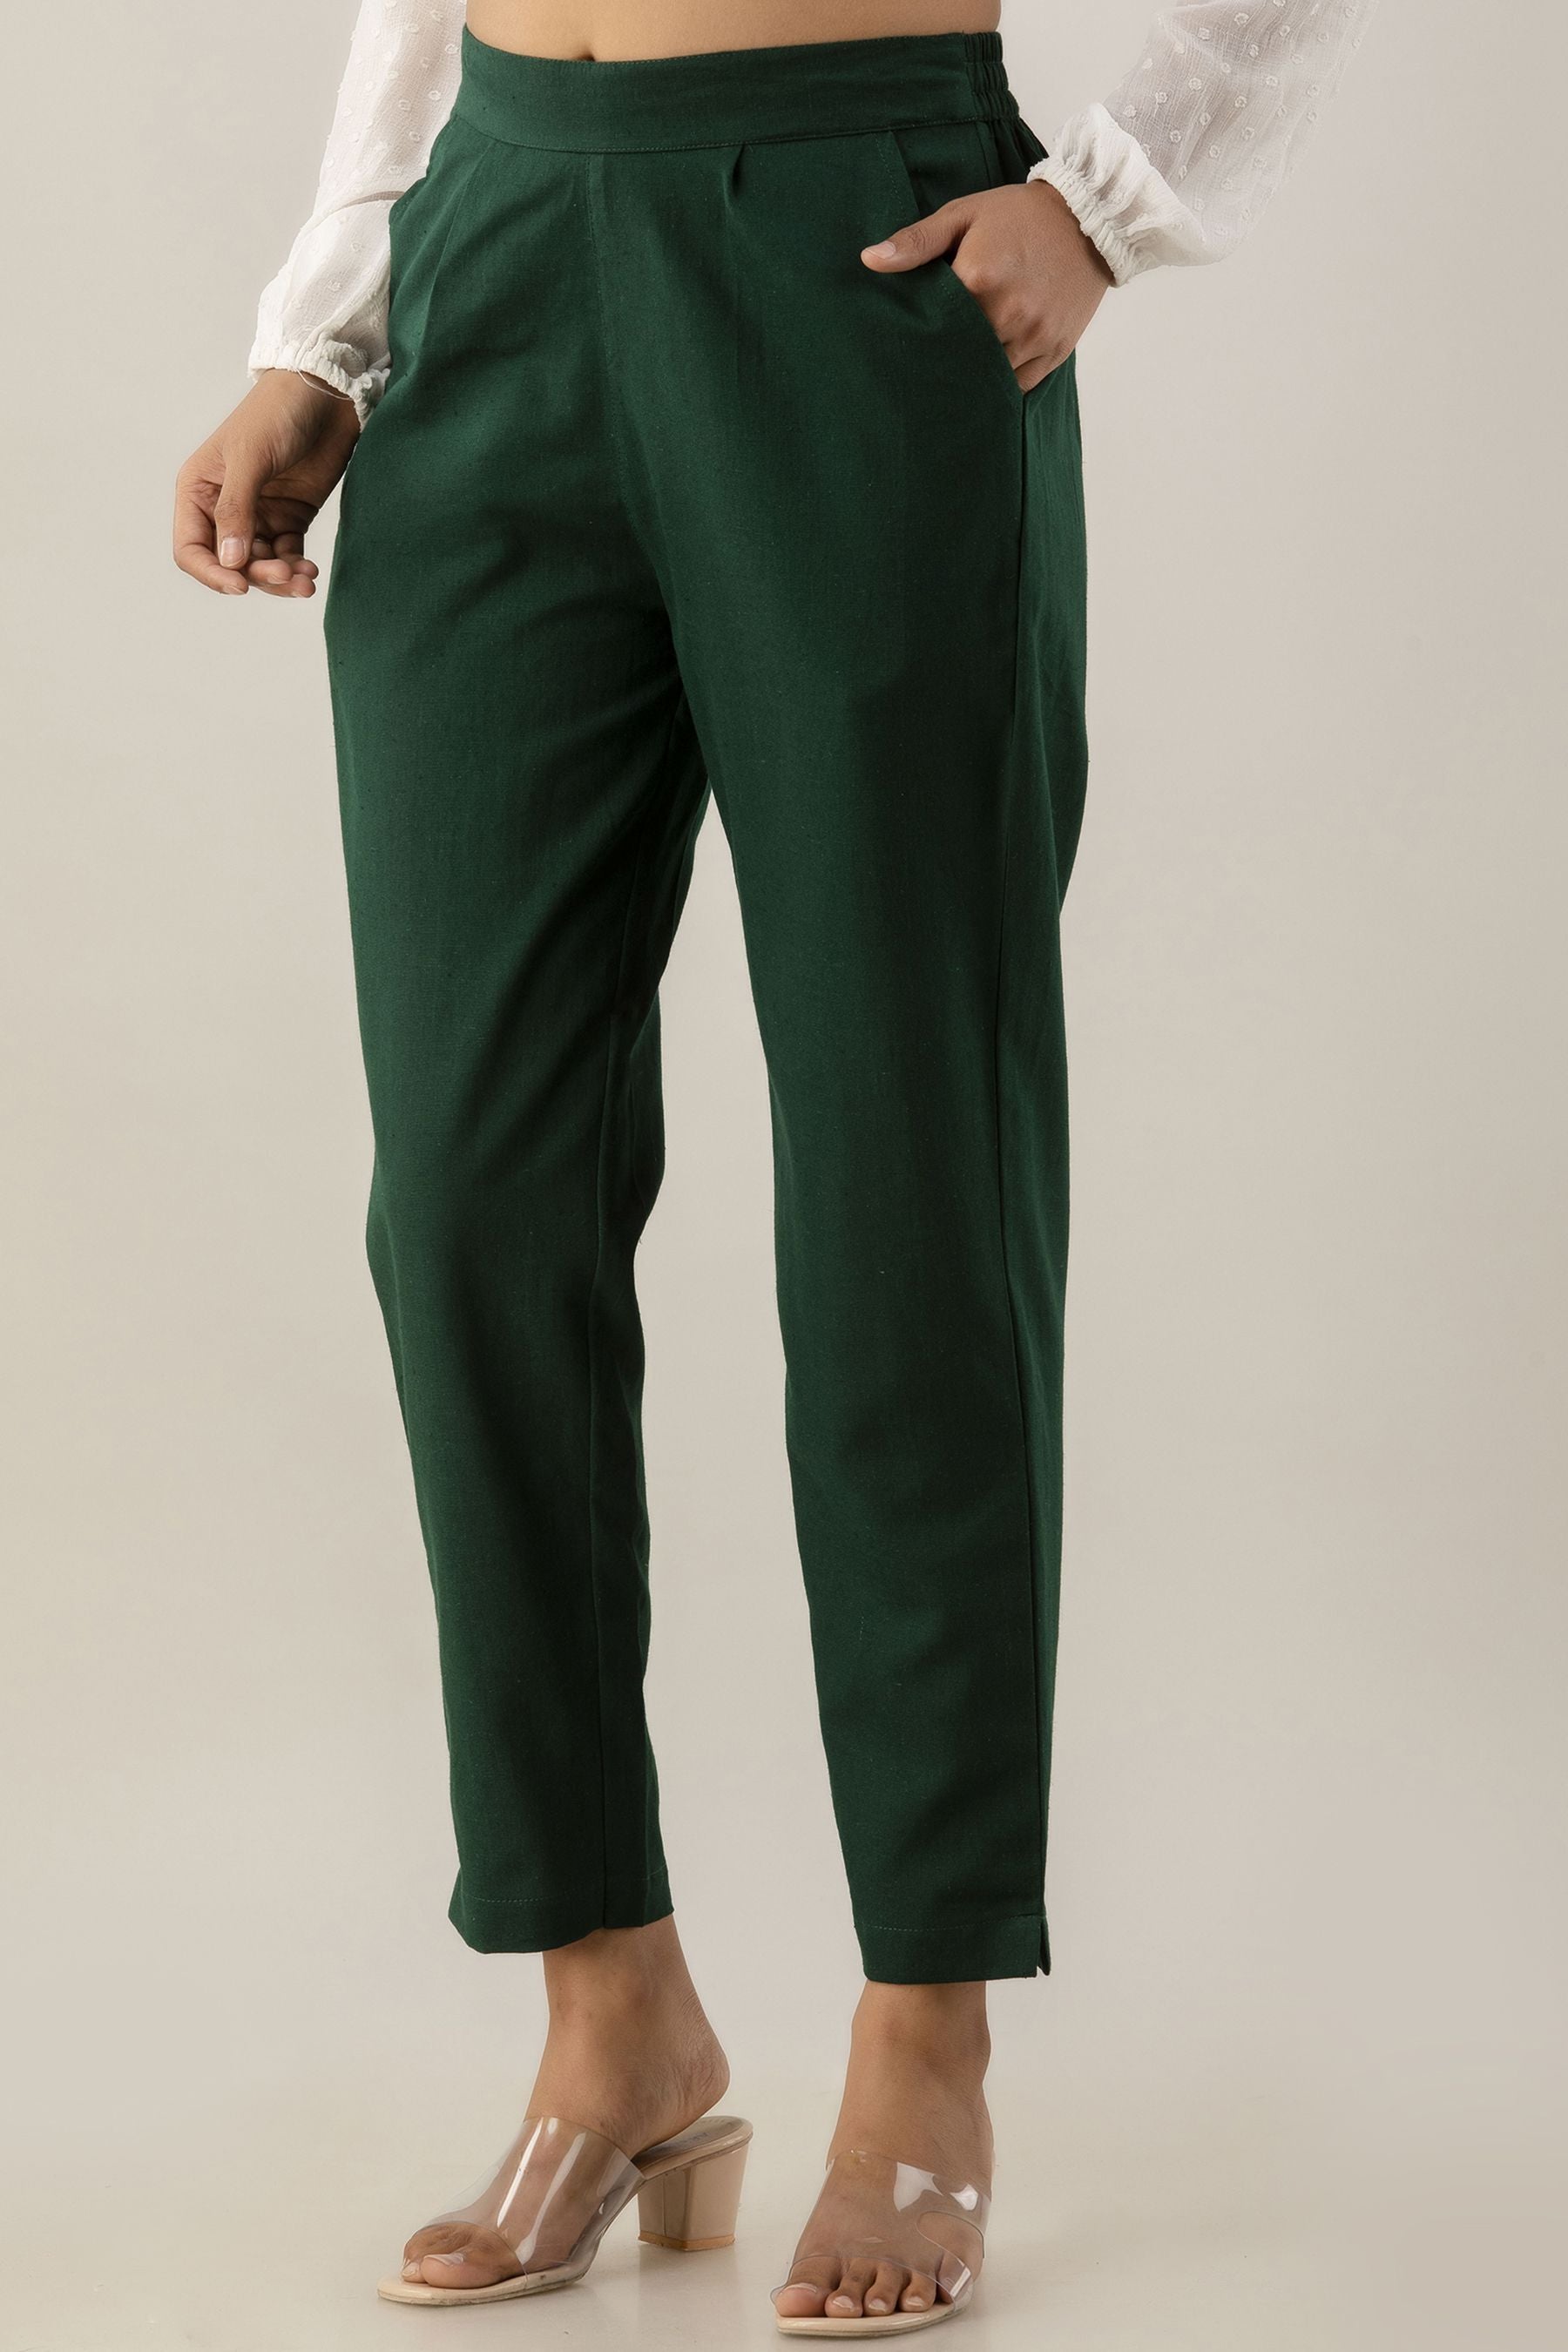 Fashionable Outfits With Dark Green Pants For Ladies | Green pants women,  Dark green pants, Green pants outfit